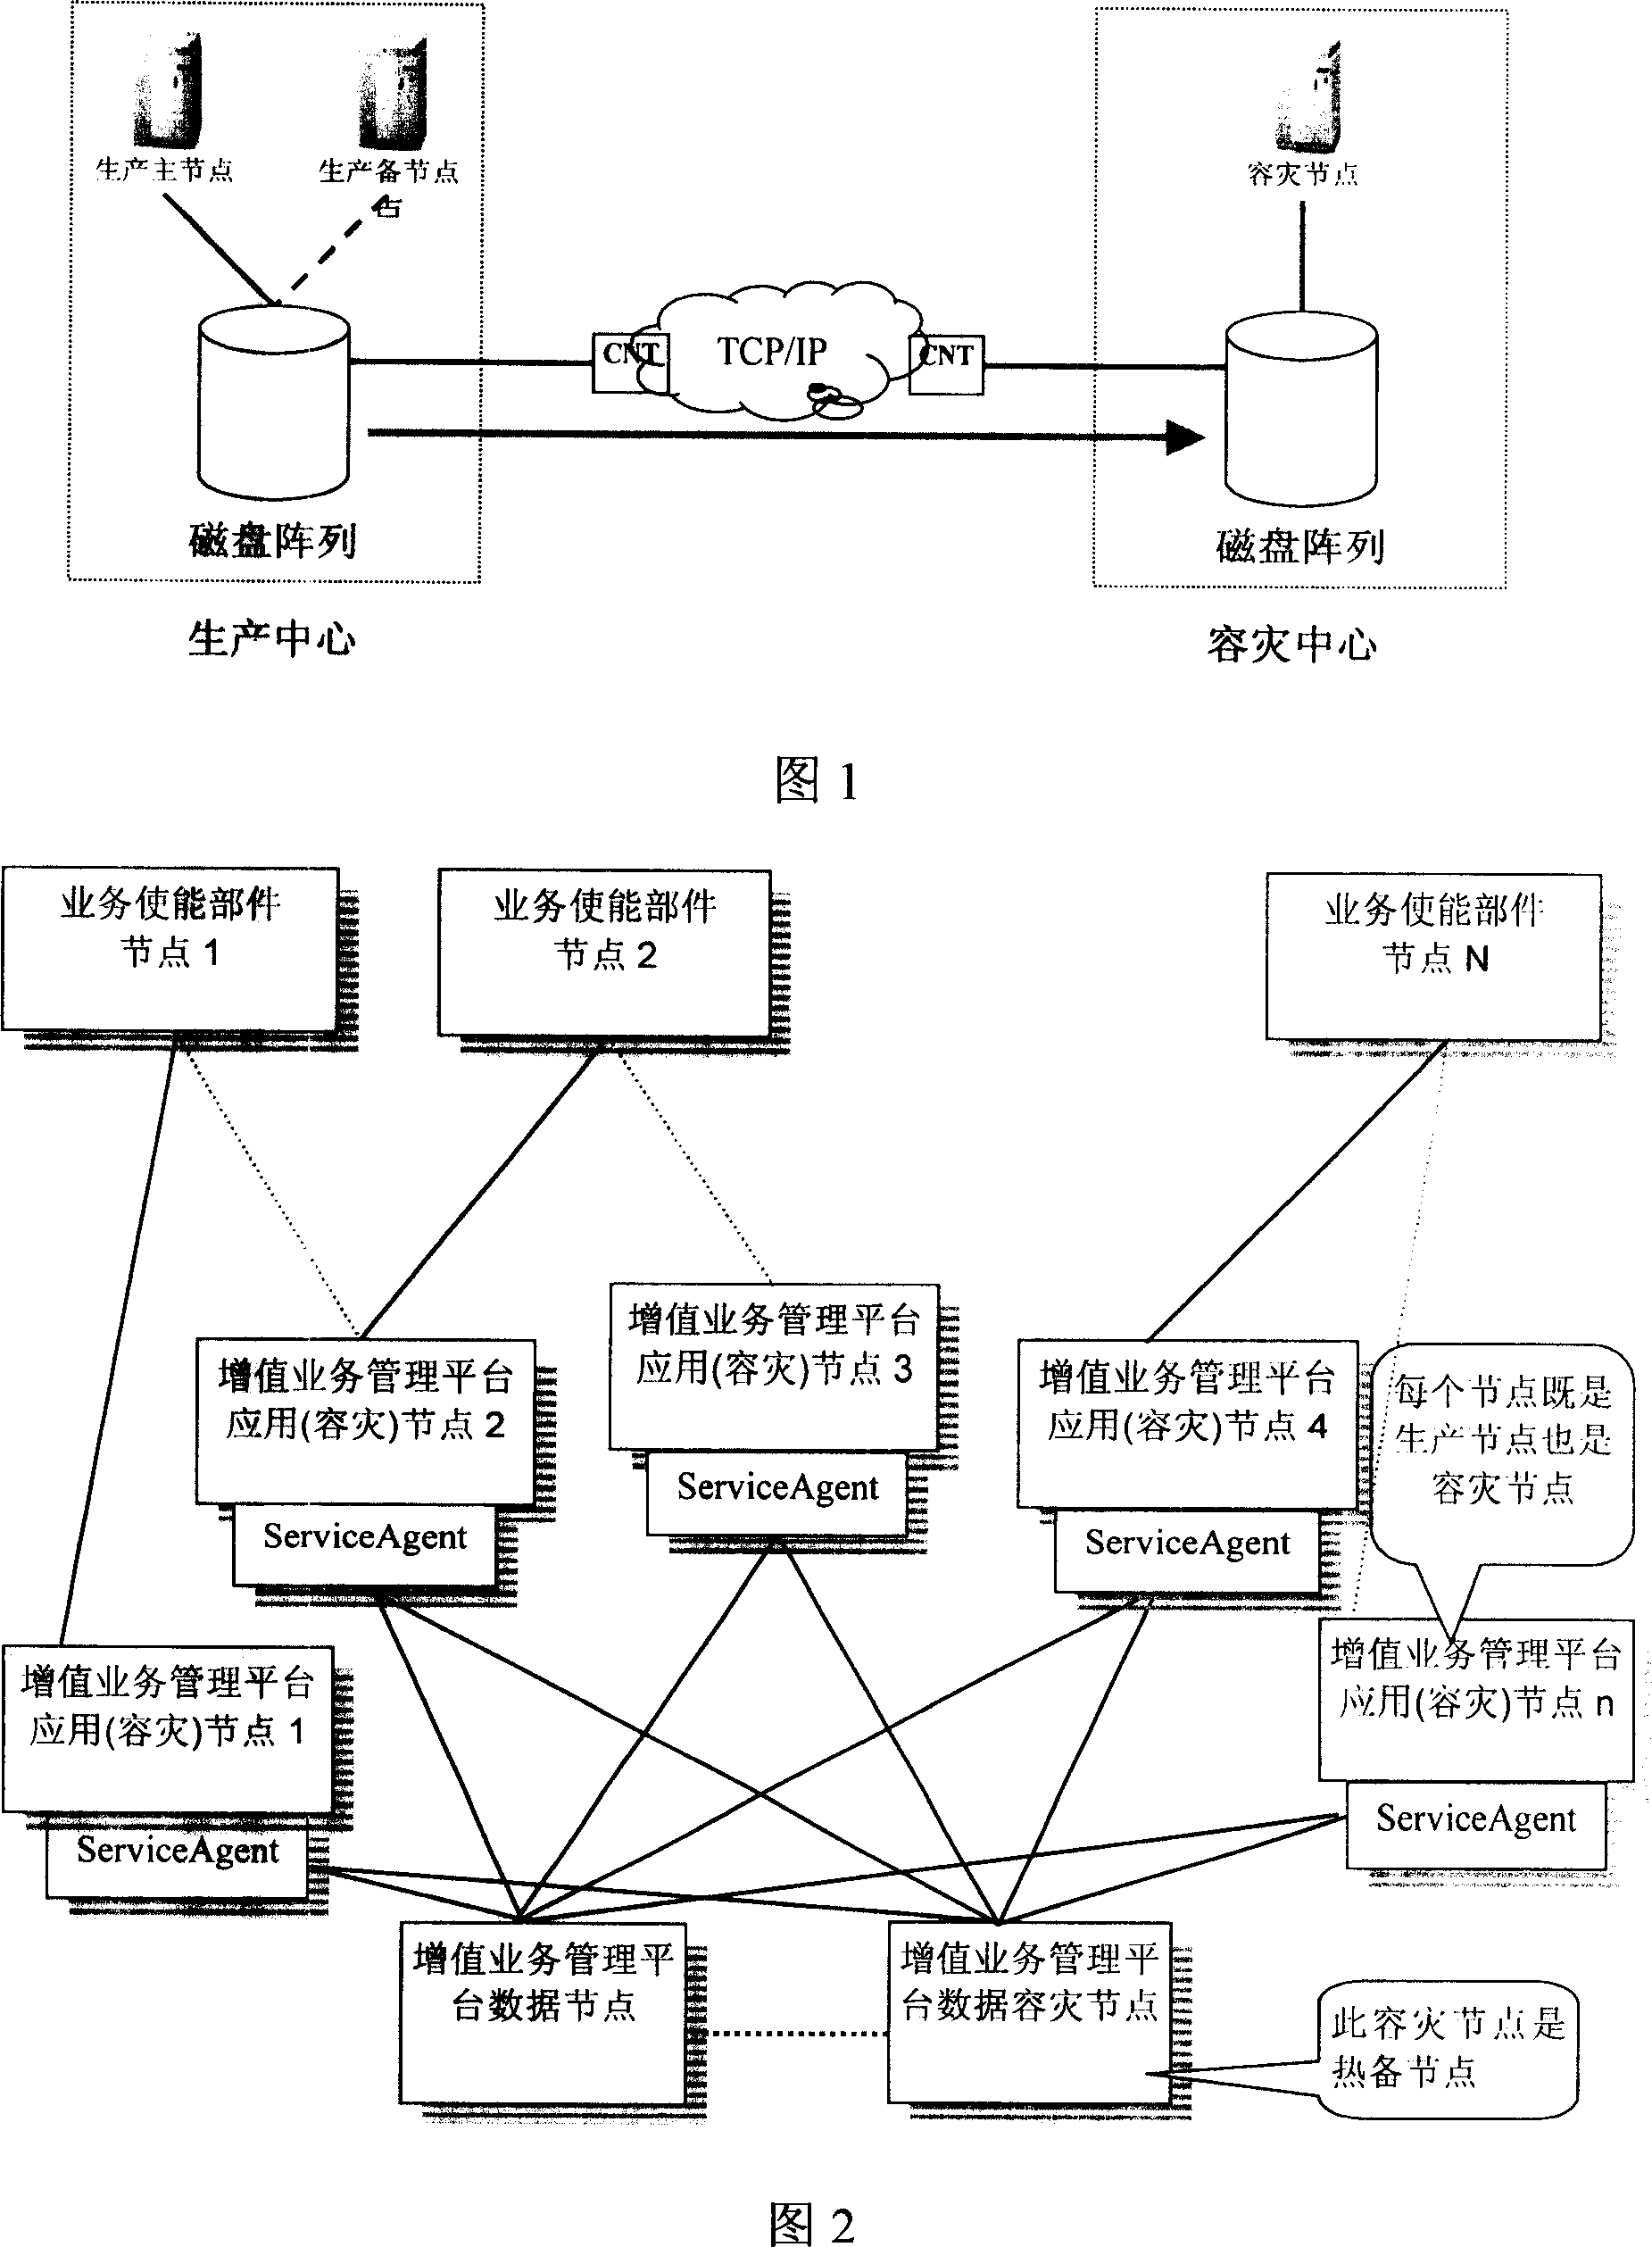 Disaster recovery system, method and network device